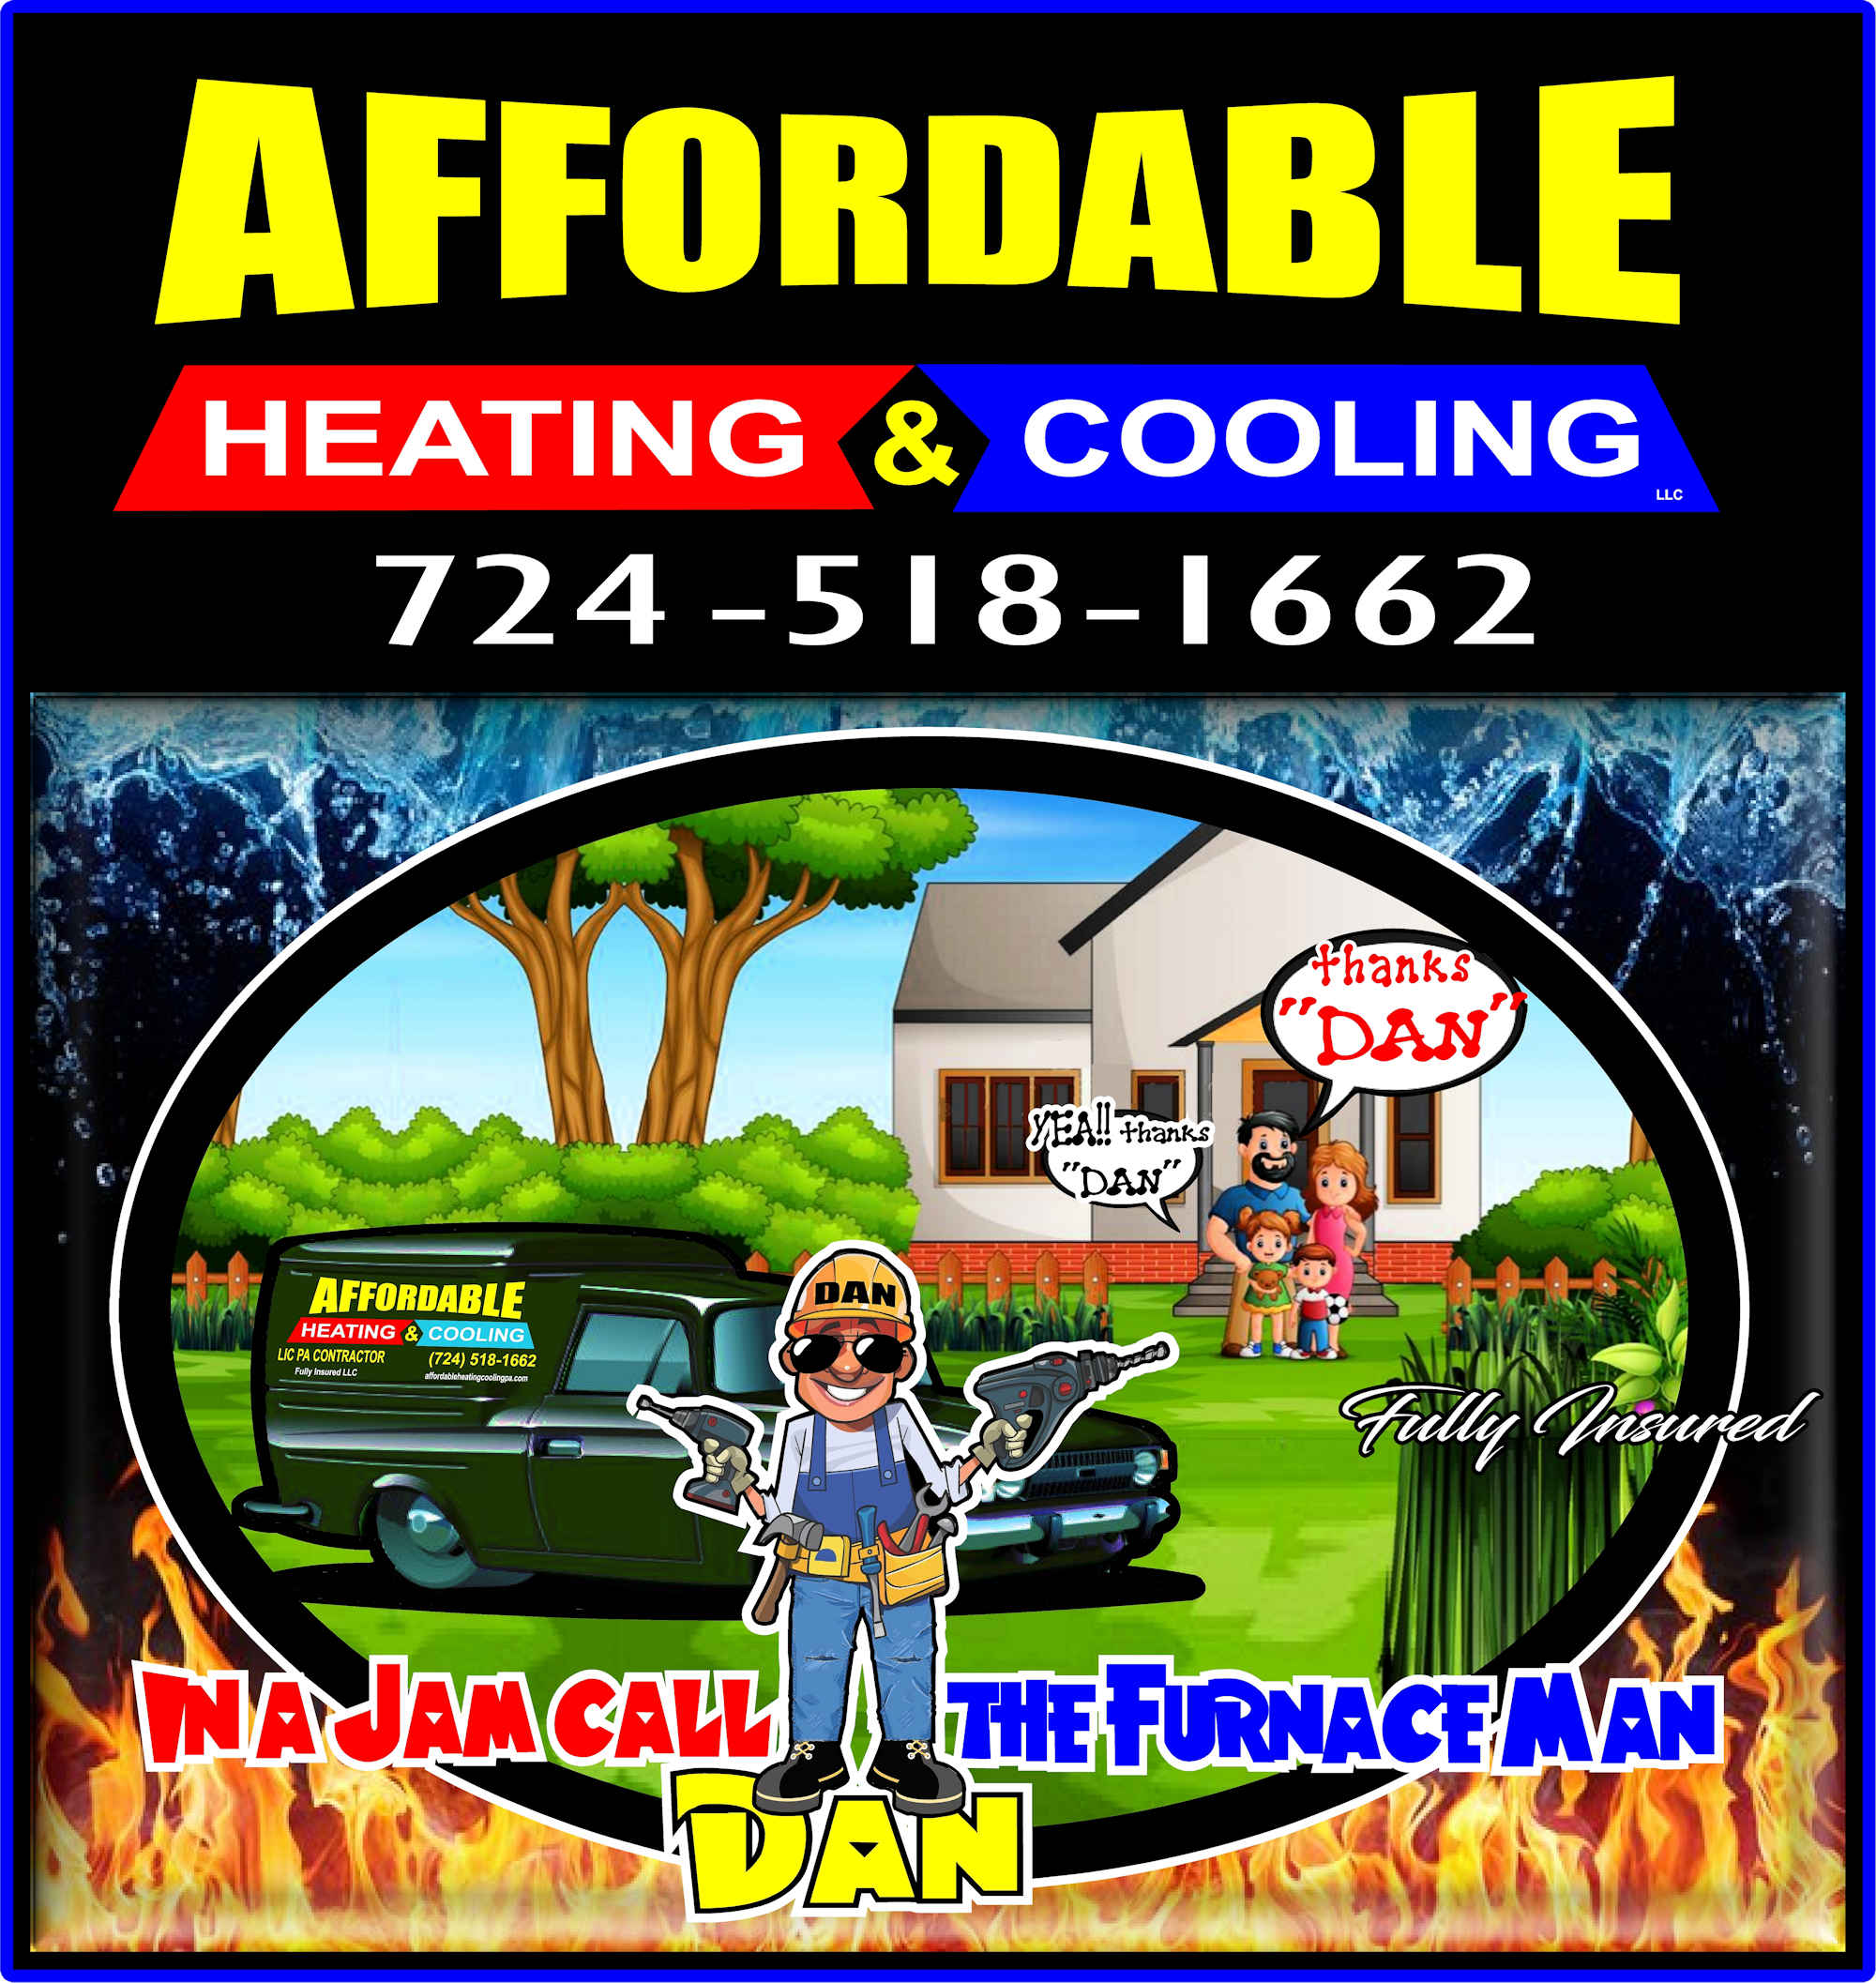 Affordable Heating and Cooling Repair Service